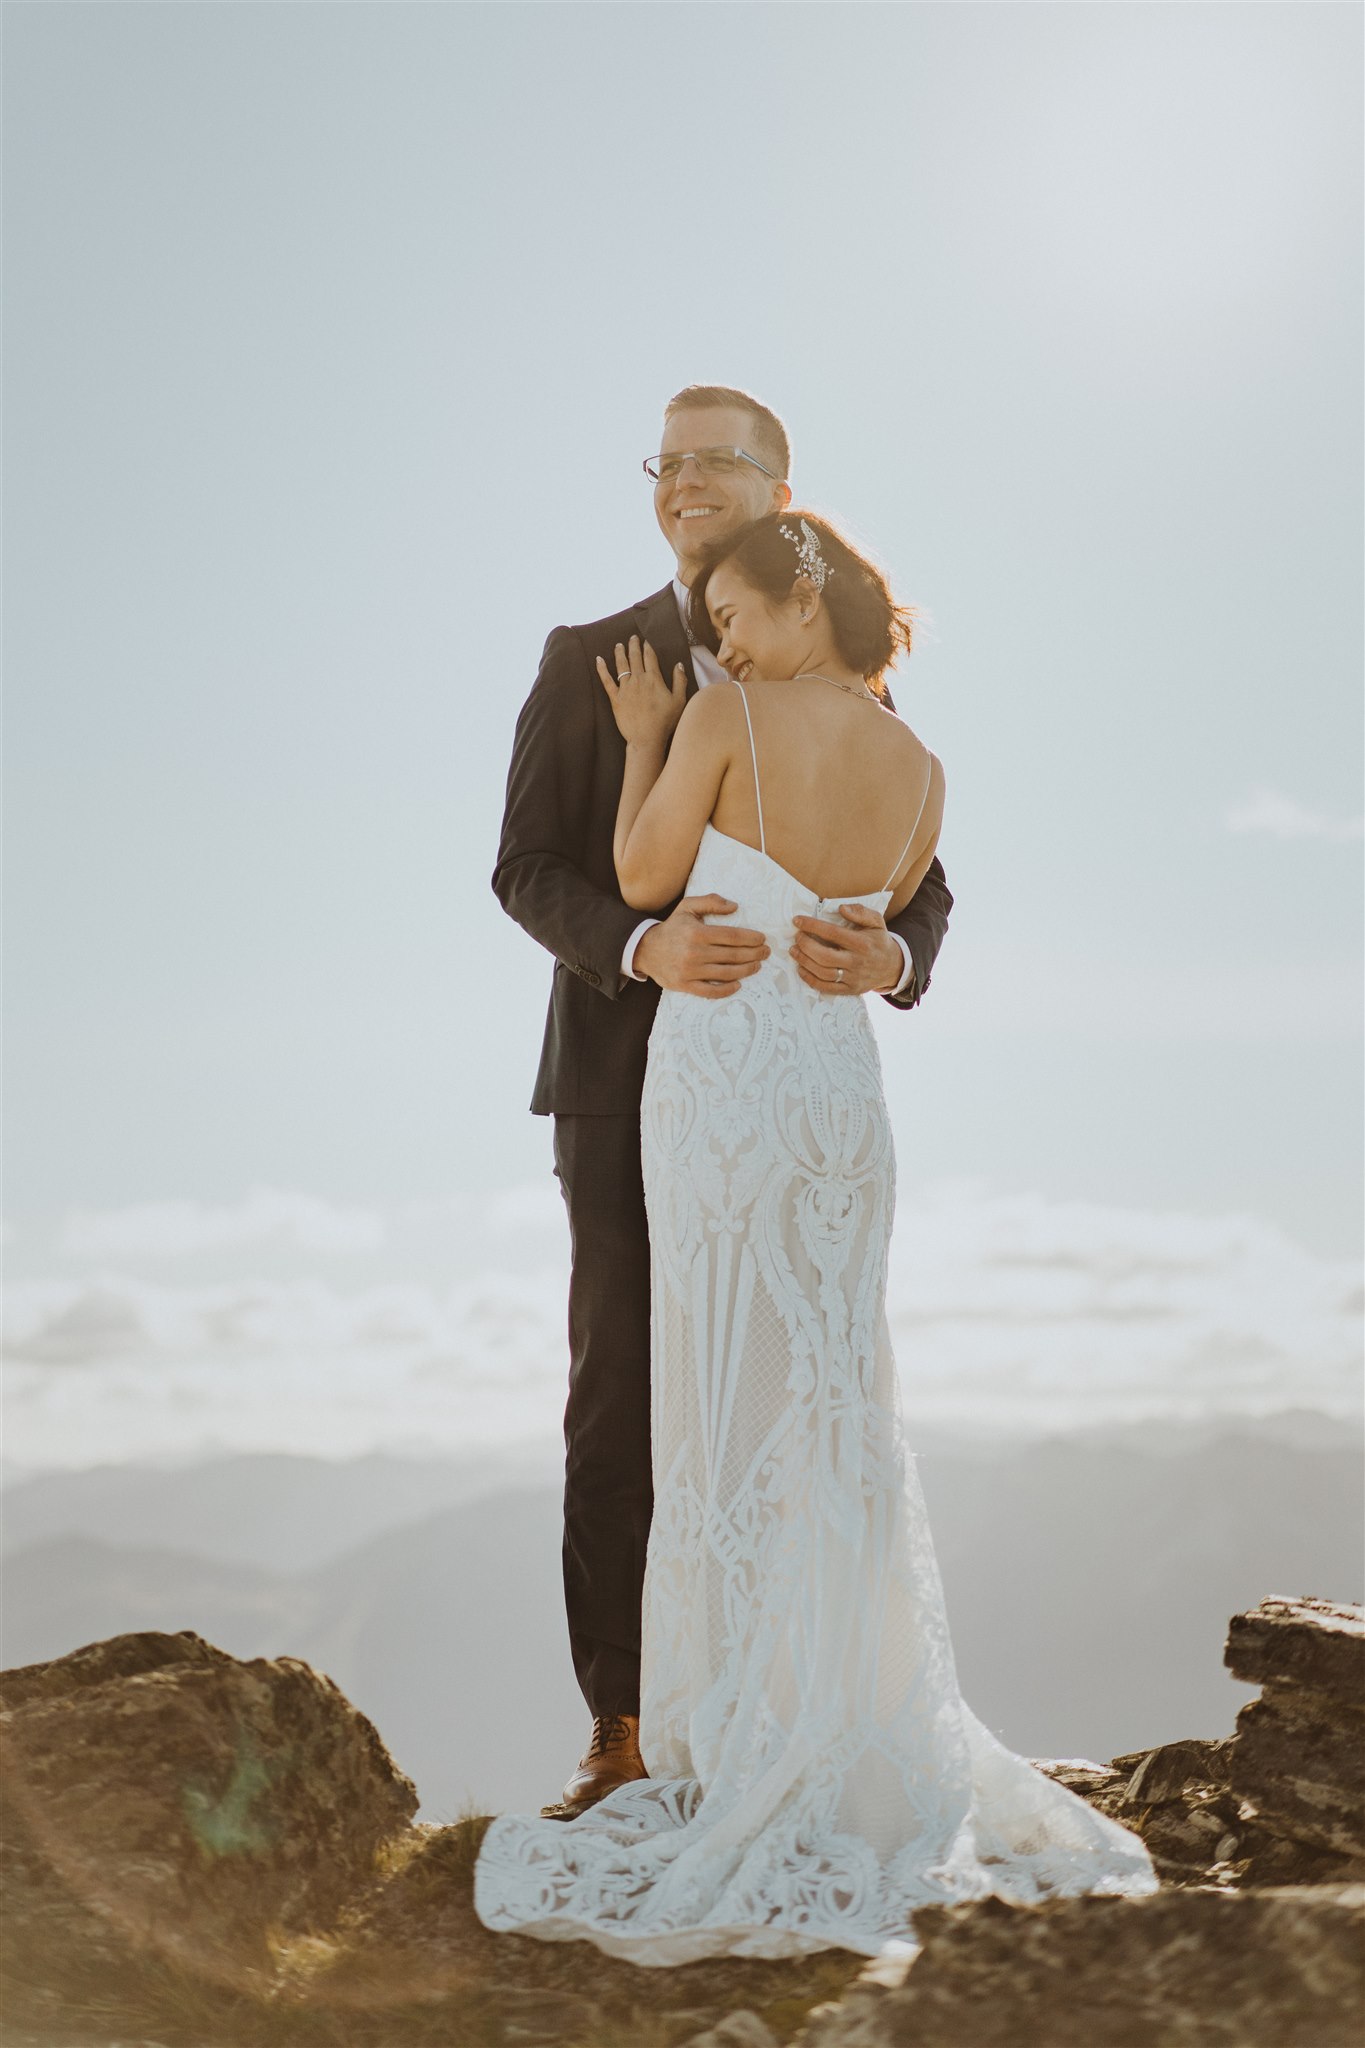 Bride and groom in wedding outfits cuddling on mountain top in Queenstown, New Zealand